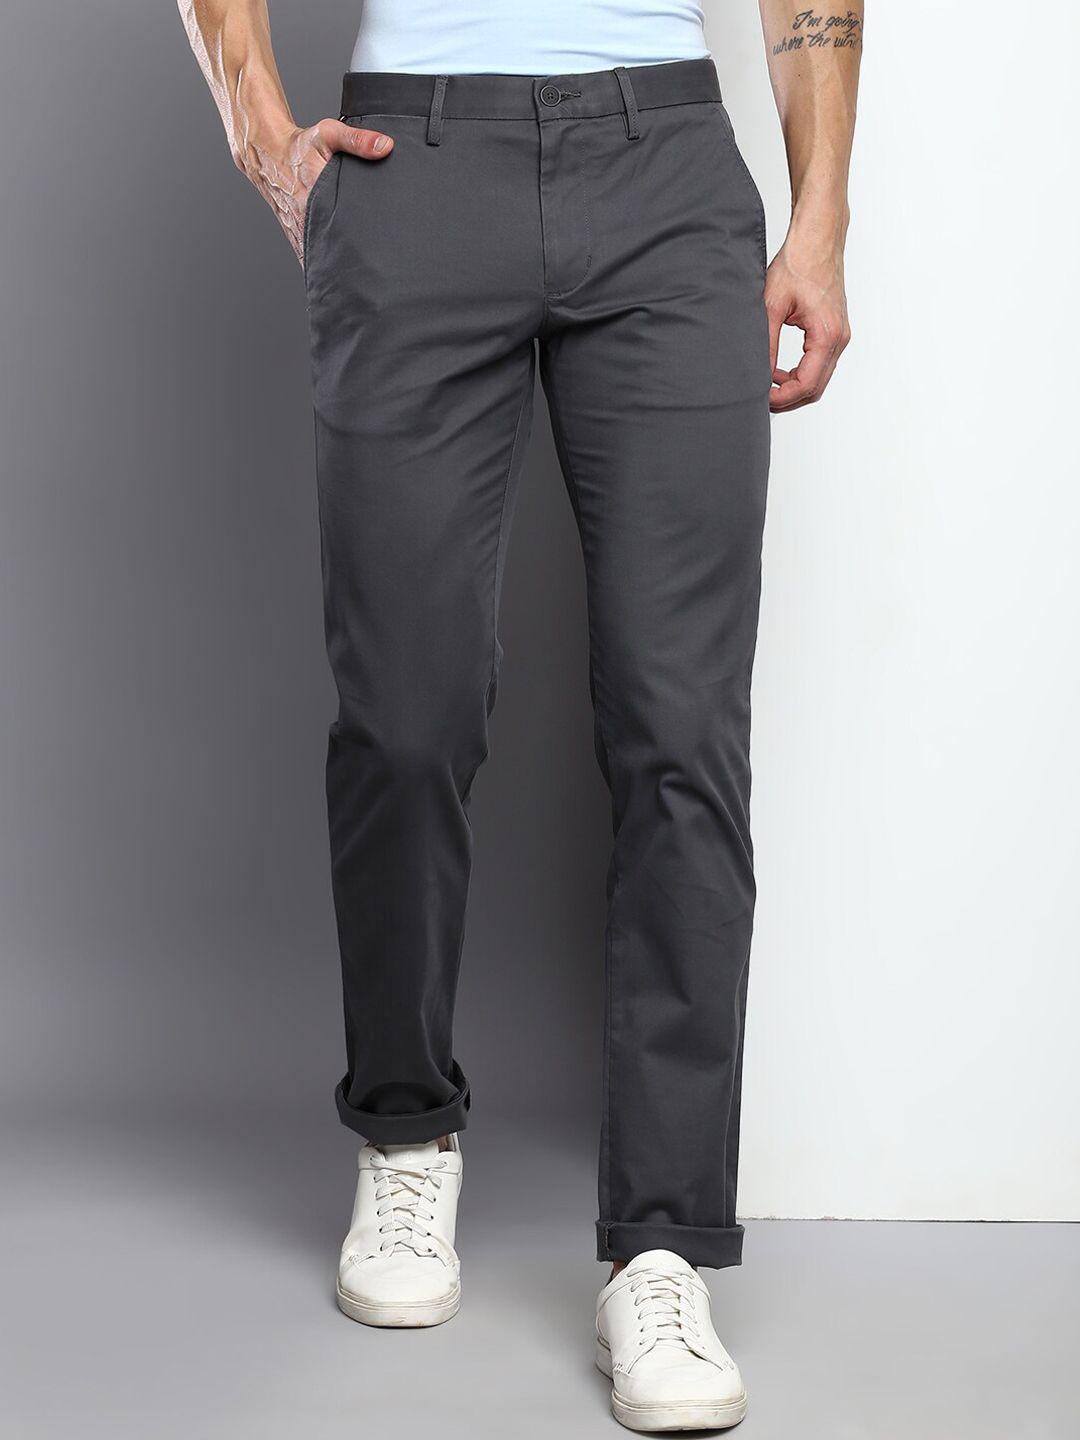 tommy-hilfiger-men-grey-chinos-trousers